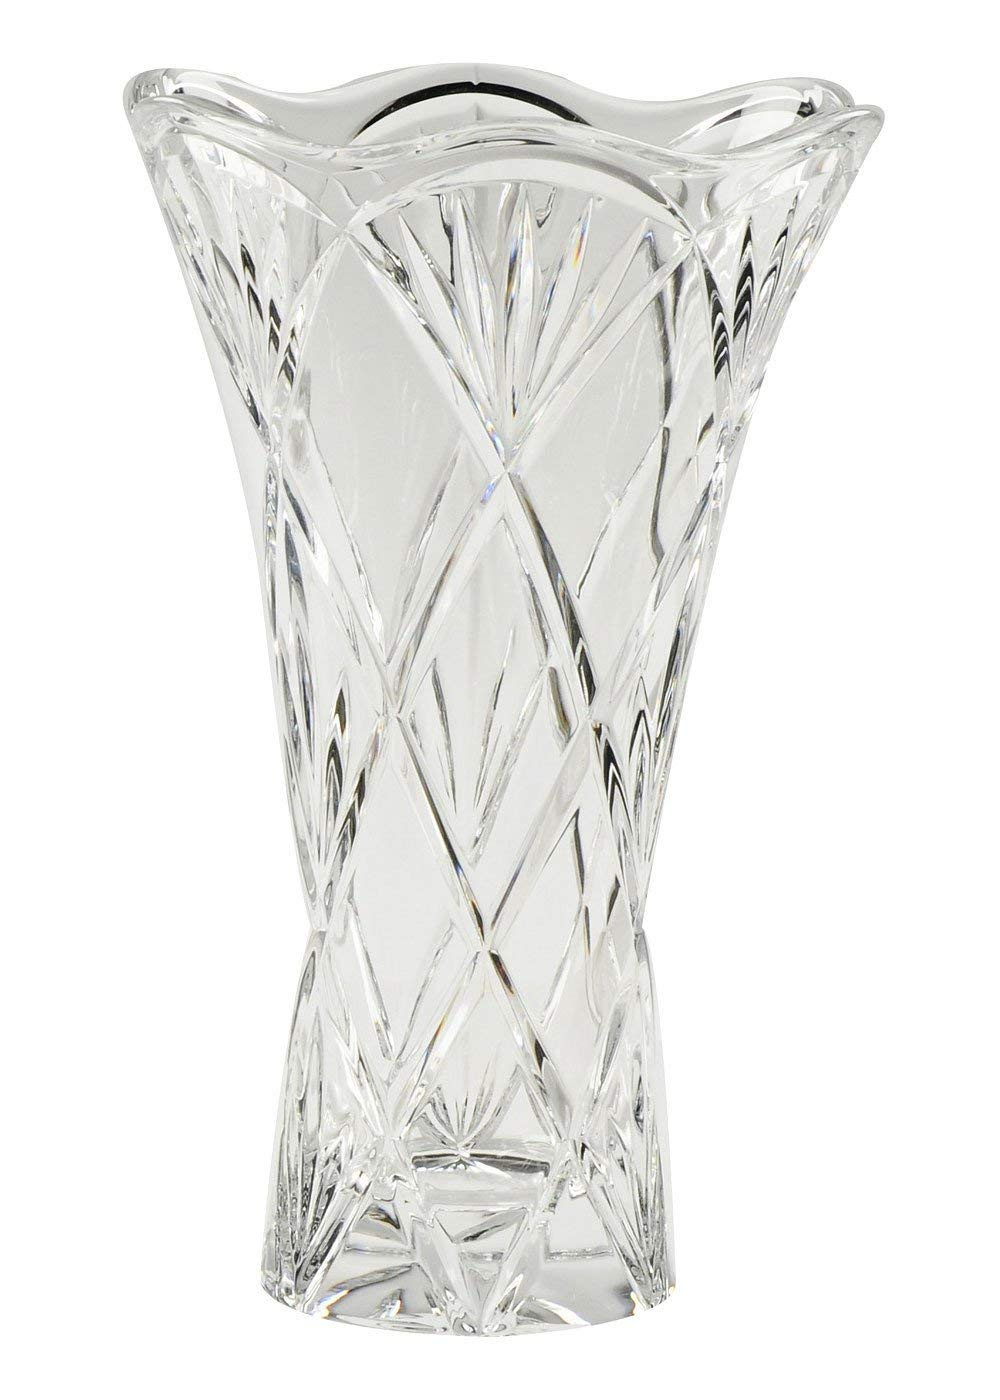 13 Lovable Waterford Marquis Markham Vase 2024 free download waterford marquis markham vase of amazon com marquis by waterford honour 10 inch vase home kitchen for 71og61b2xnl sl1400